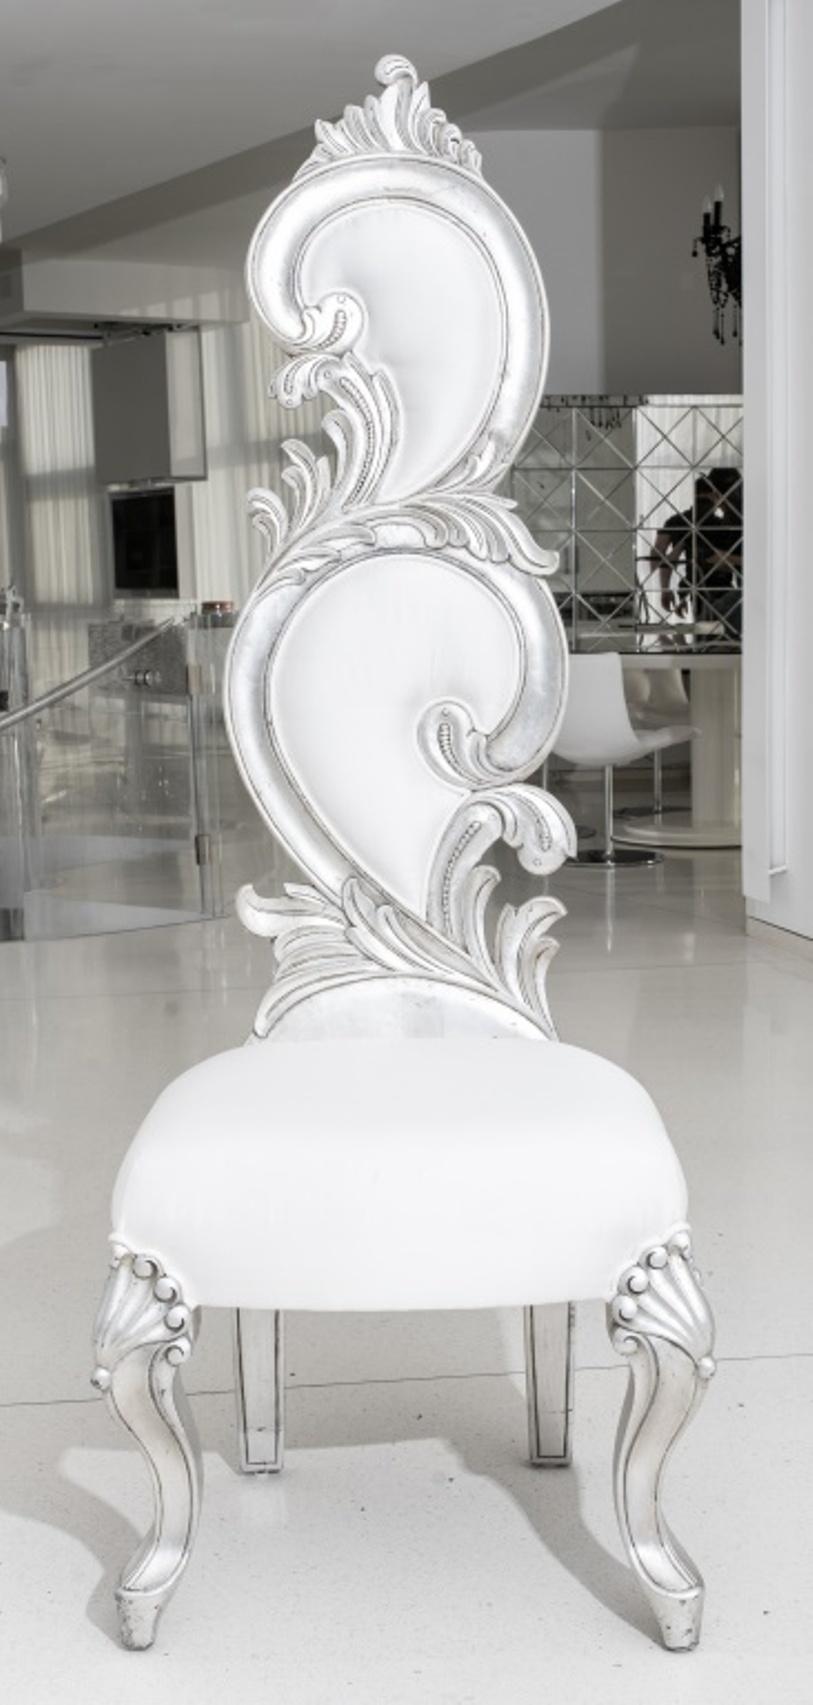 Pair of Fantasy Rococo silvered wood dining chairs, the body carved with a swirling acanthus design punctuated by white fabric inserts and hammered tacks on the back, seat upholstered white fabric, cabriole legs accentuated with anthemia, unmarked.